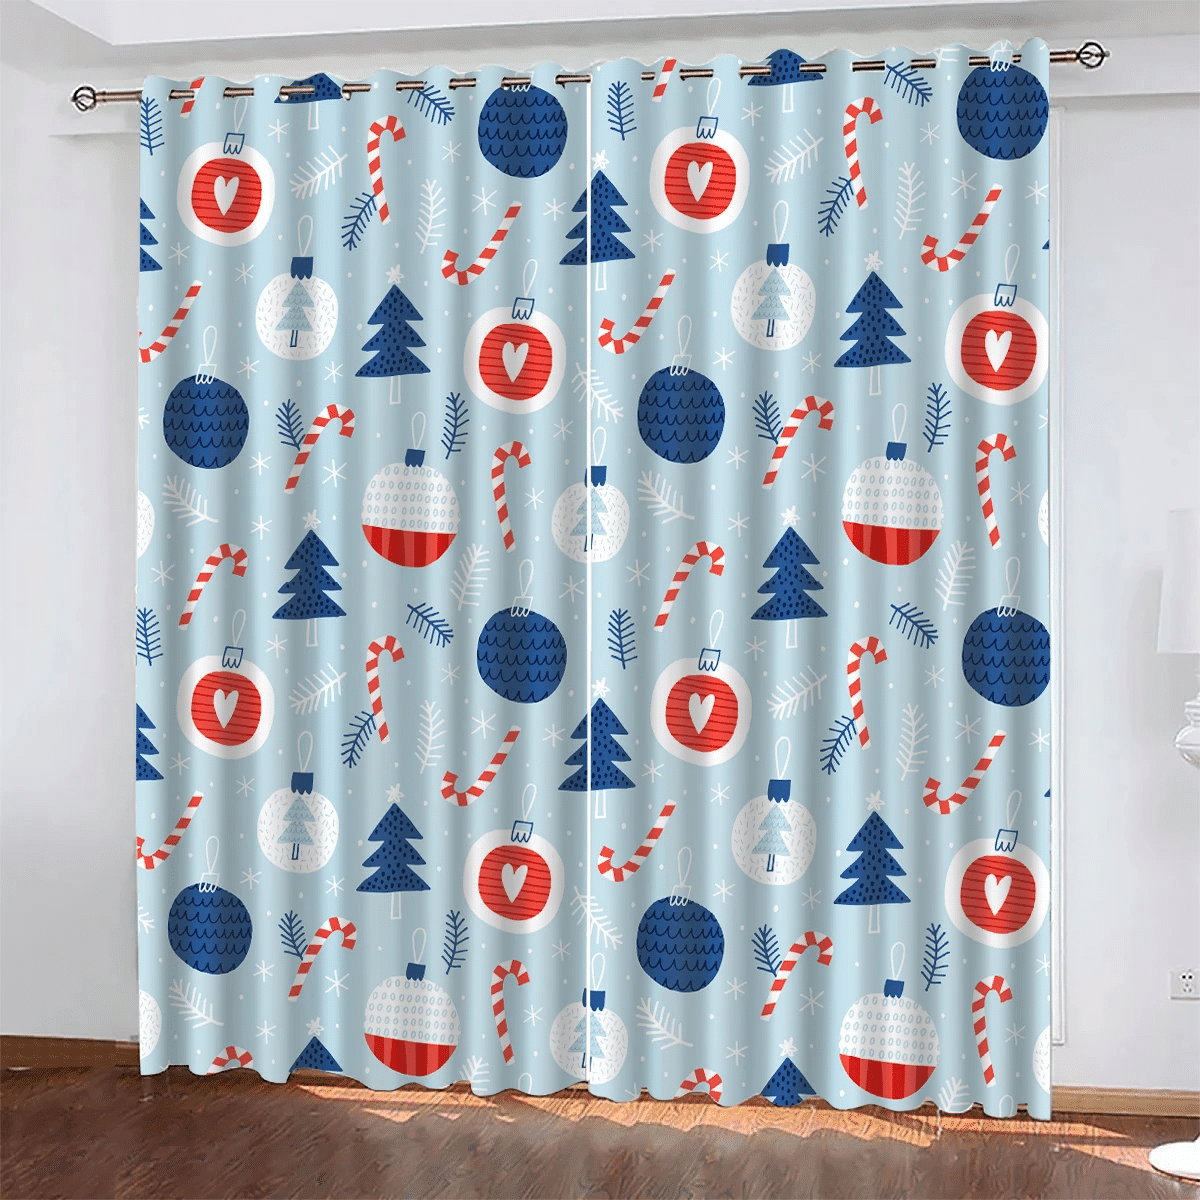 Creative Hand Drawn Textures With Balls Trees And Candy Pattern Window Curtains Door Curtains Home Decor